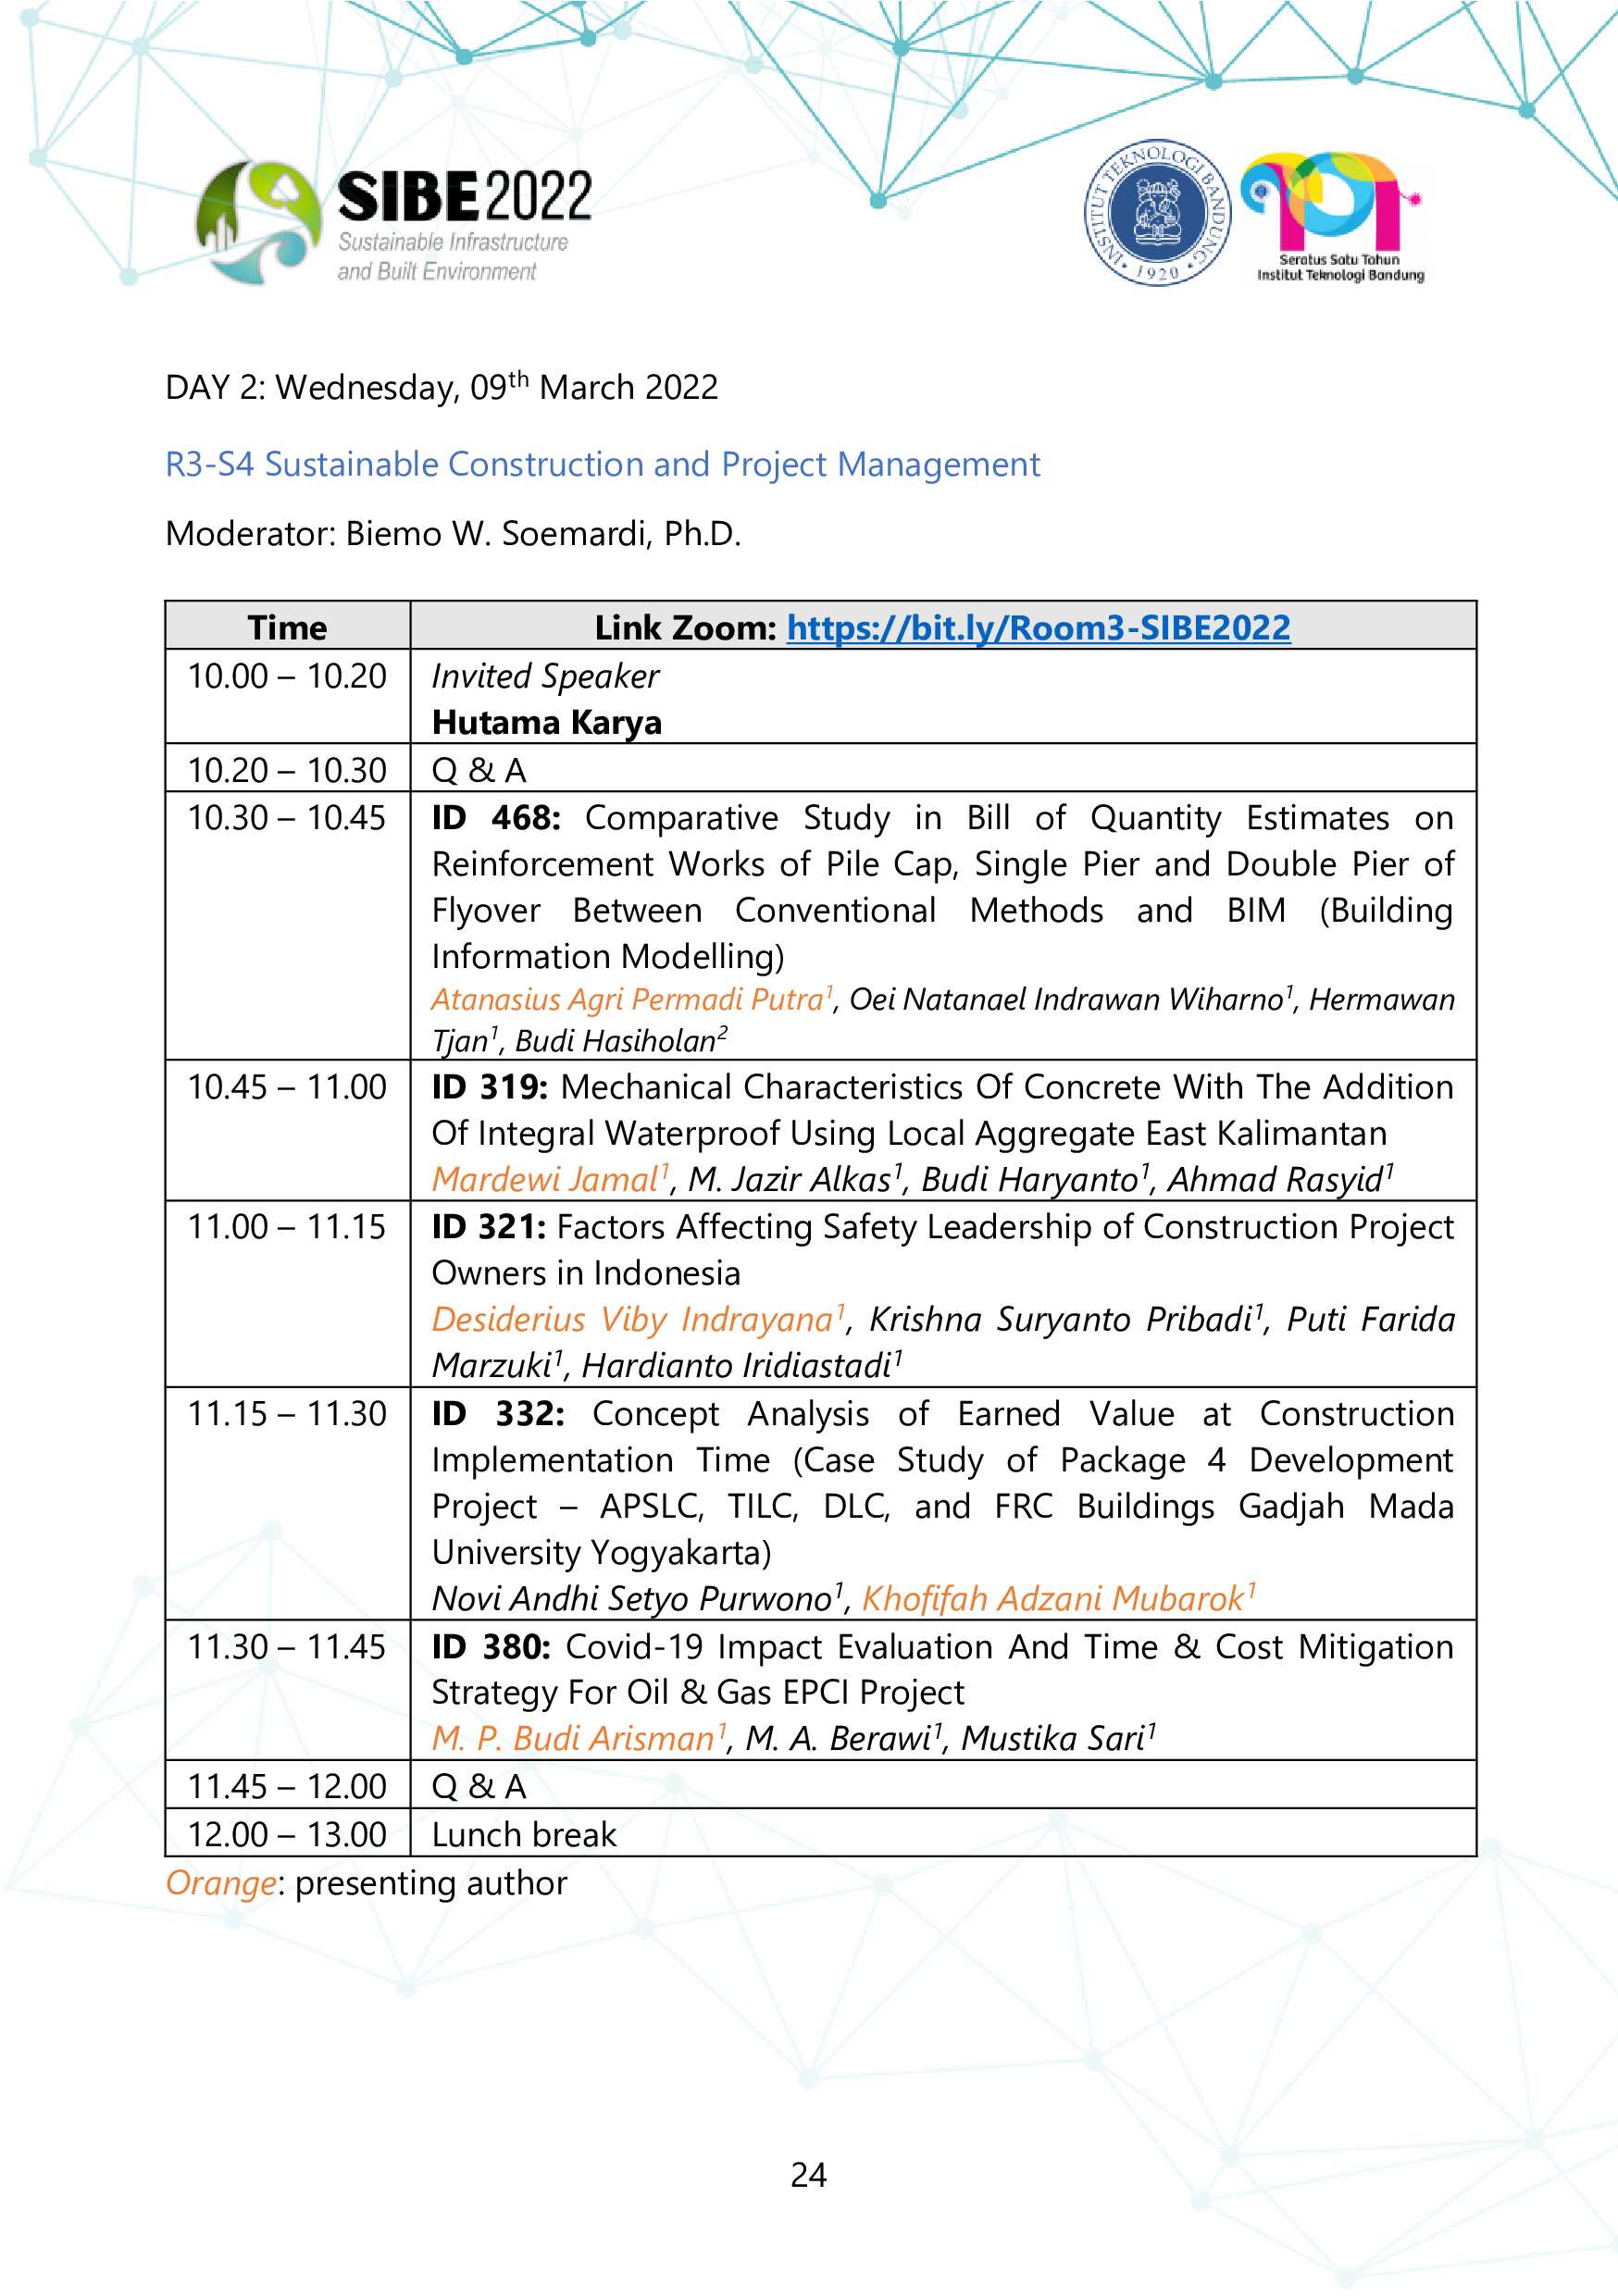 SIBE 2022 Program Schedule 8-9 March 2022-23